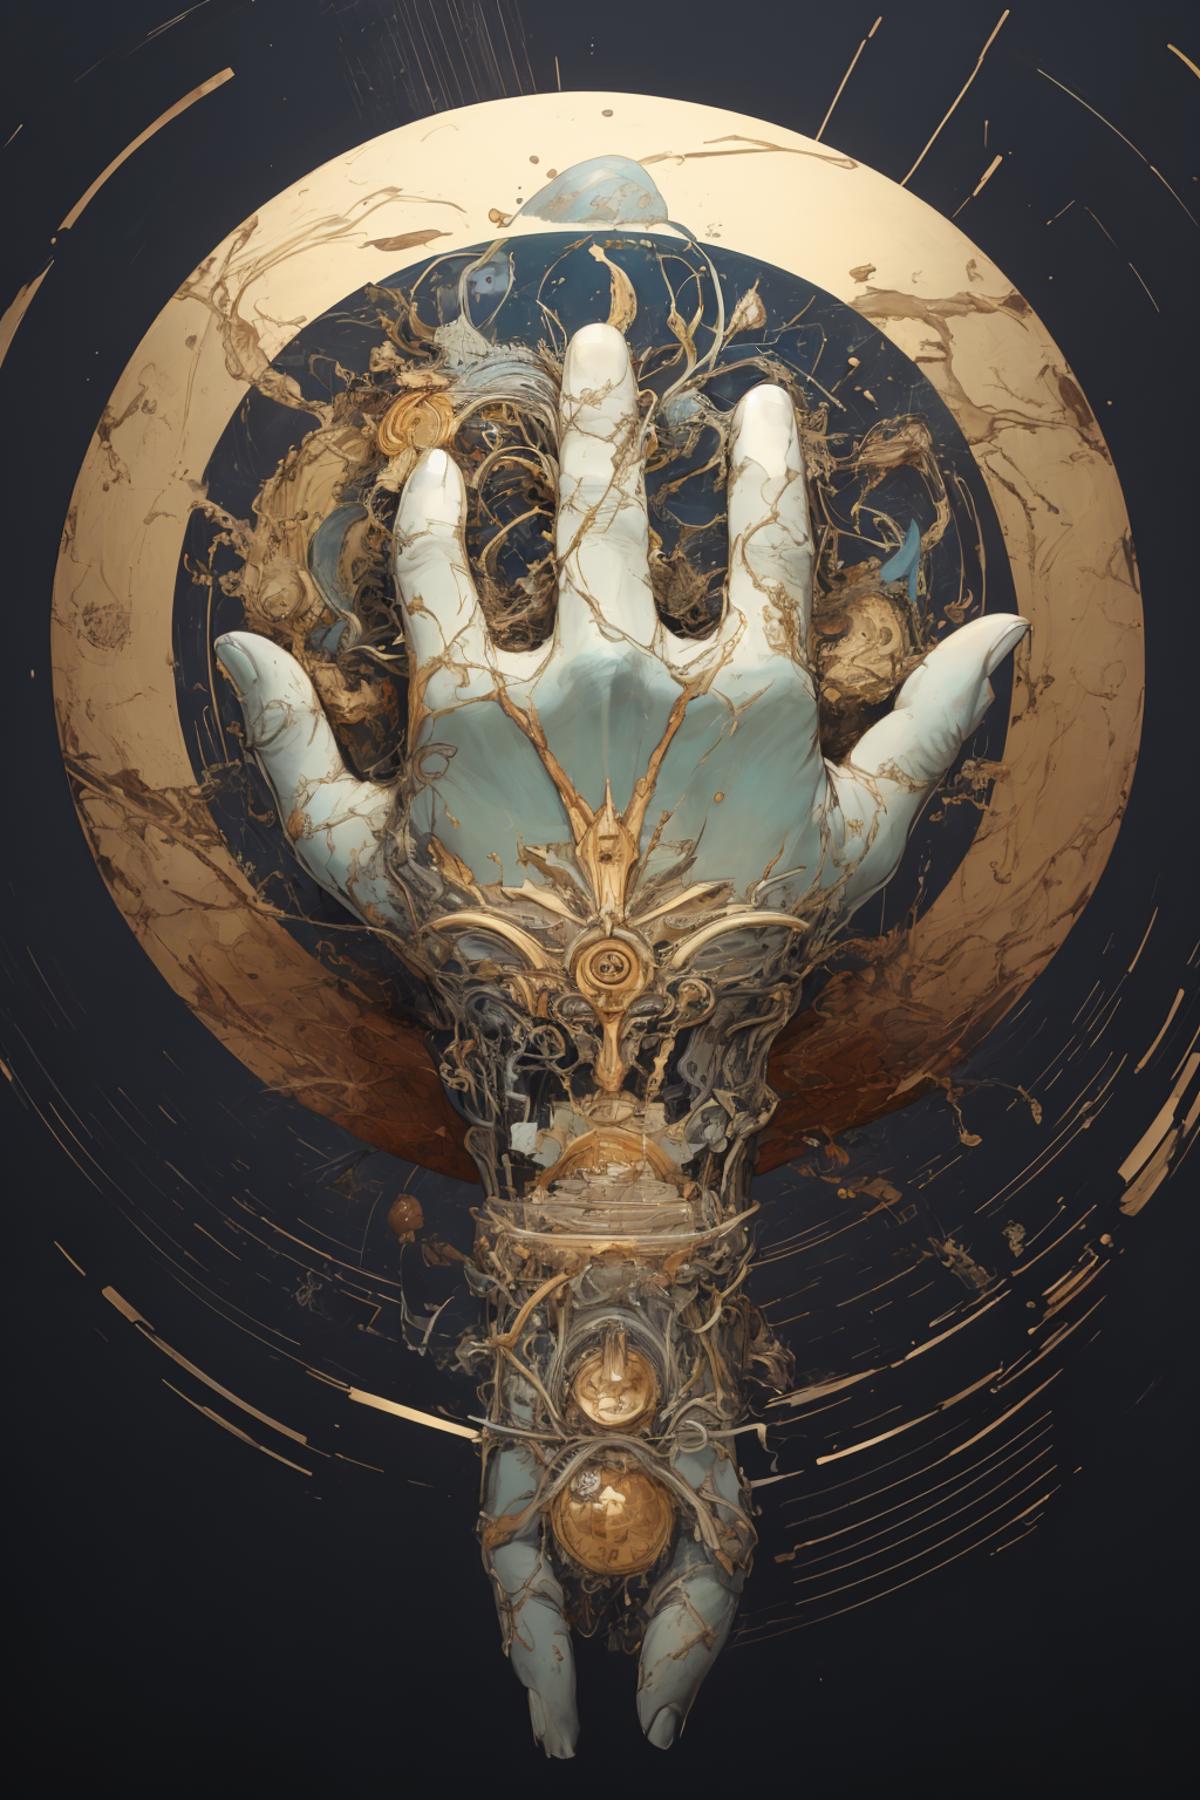 [LoRA] "Normal Hand" Concept (With dropout & noise version) image by L_A_X